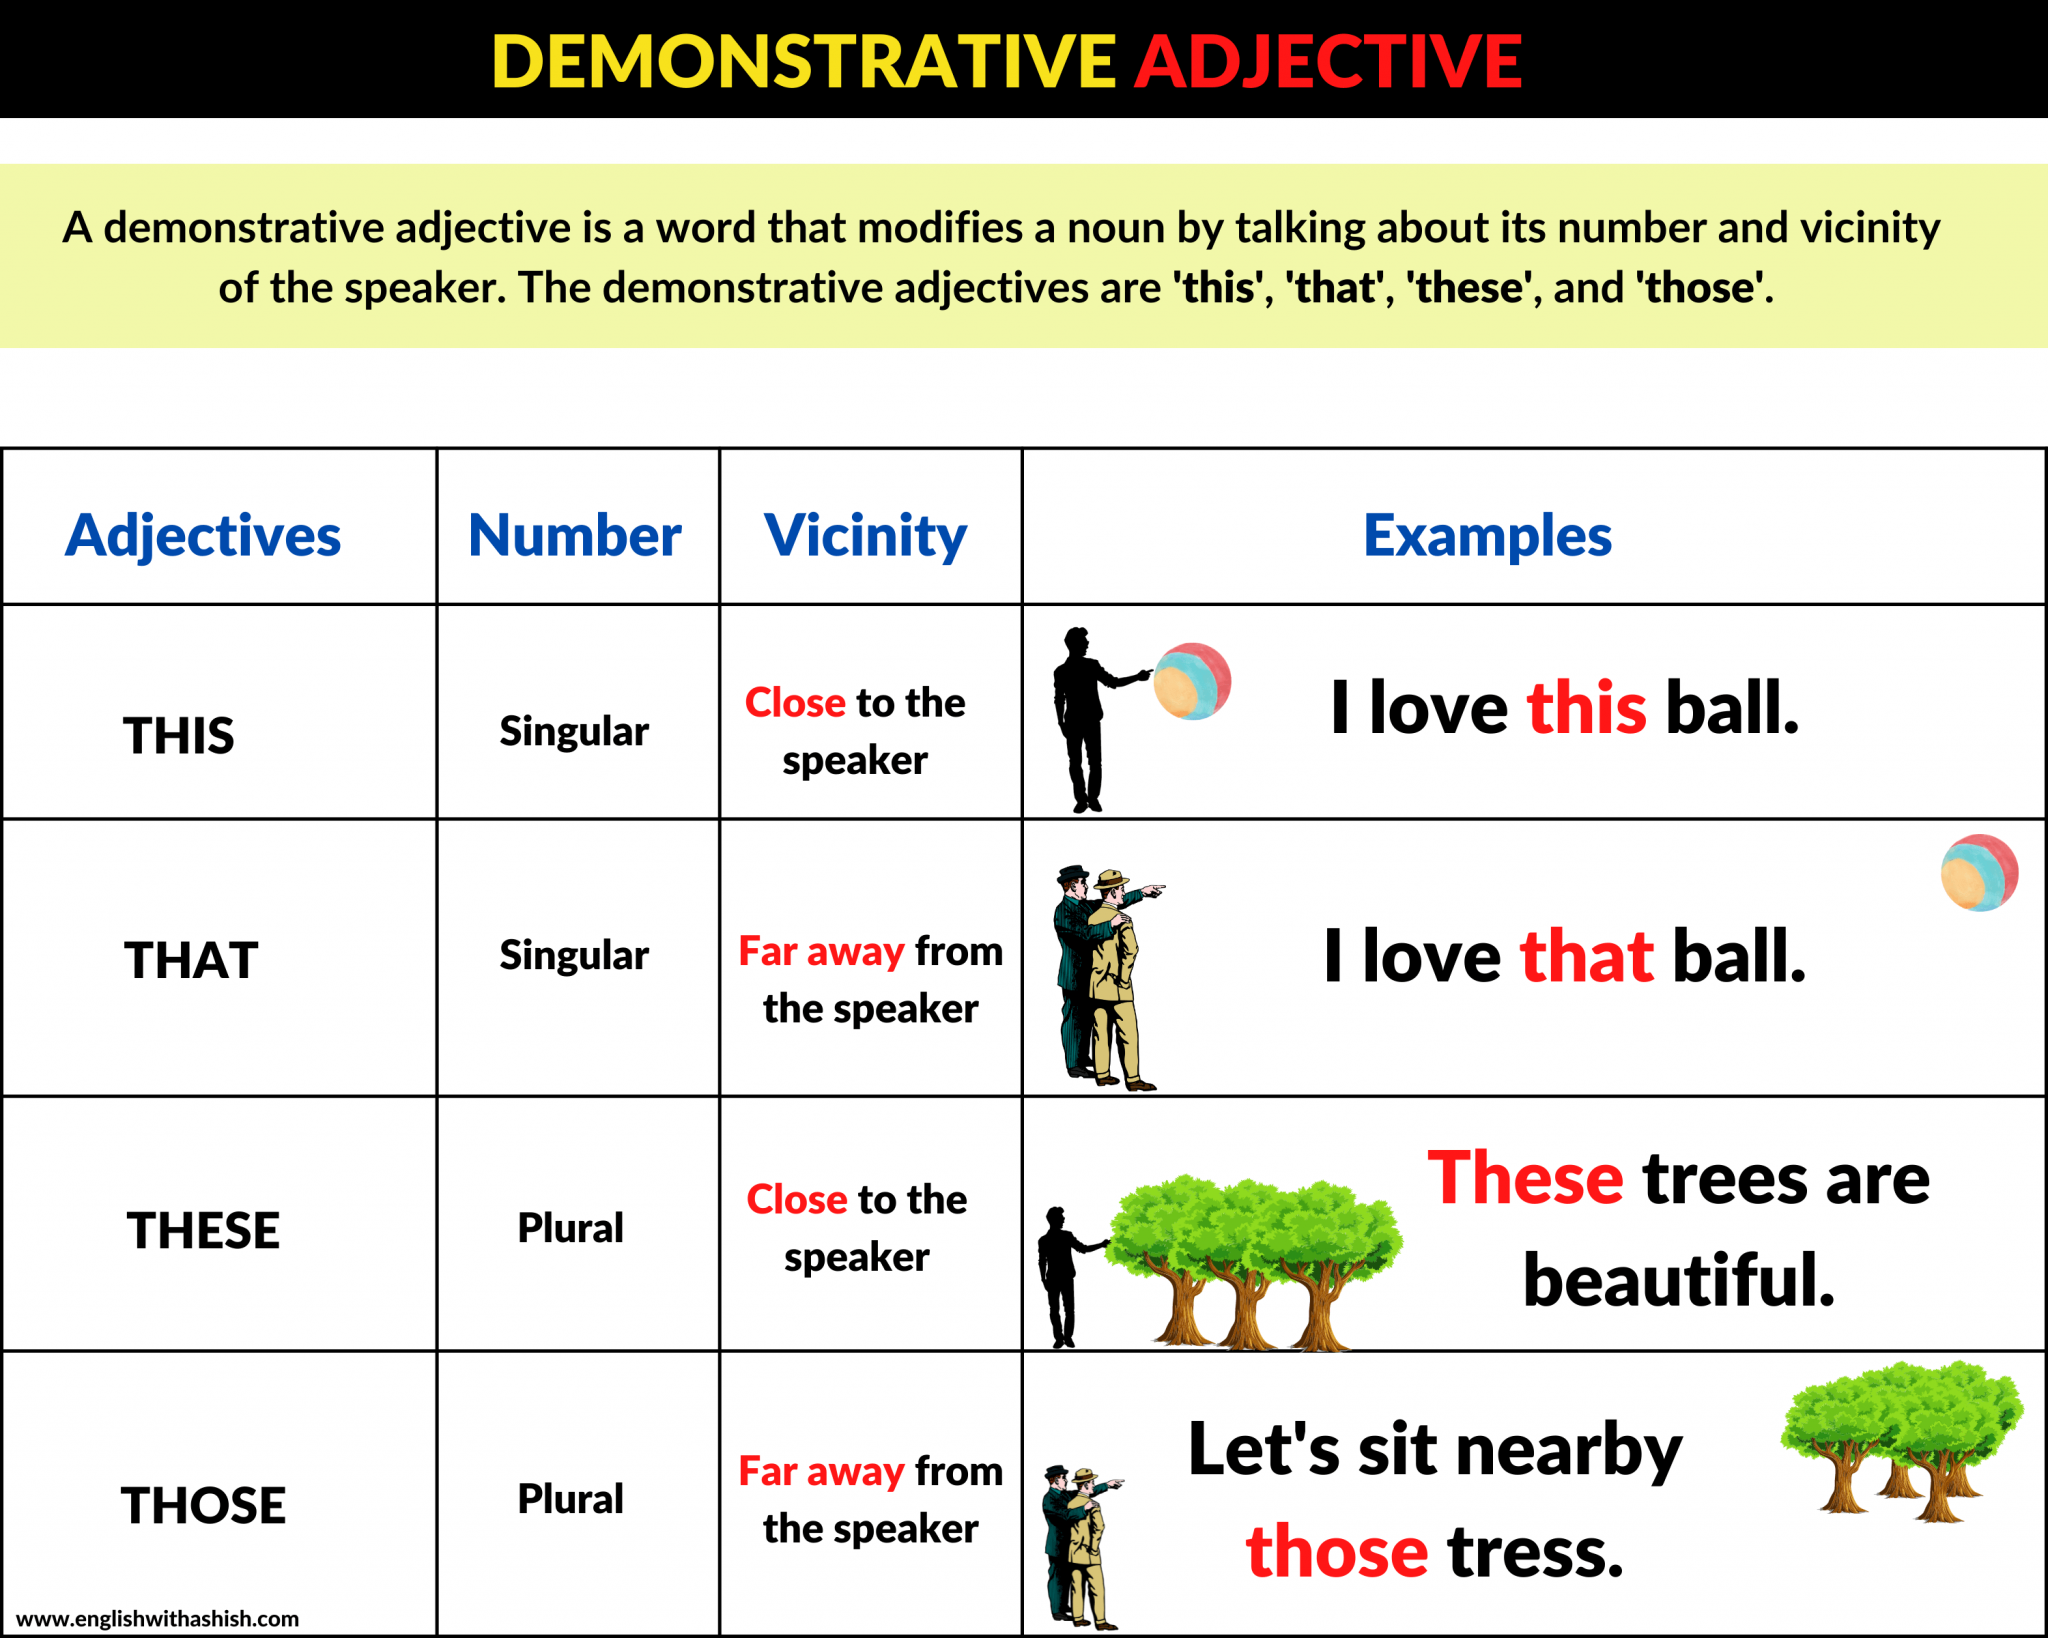 Demonstrative adjectives в английском. What is adjective. Adjective demonstrative во французском. Demonstrative adjectives and pronouns. Adjectives definition